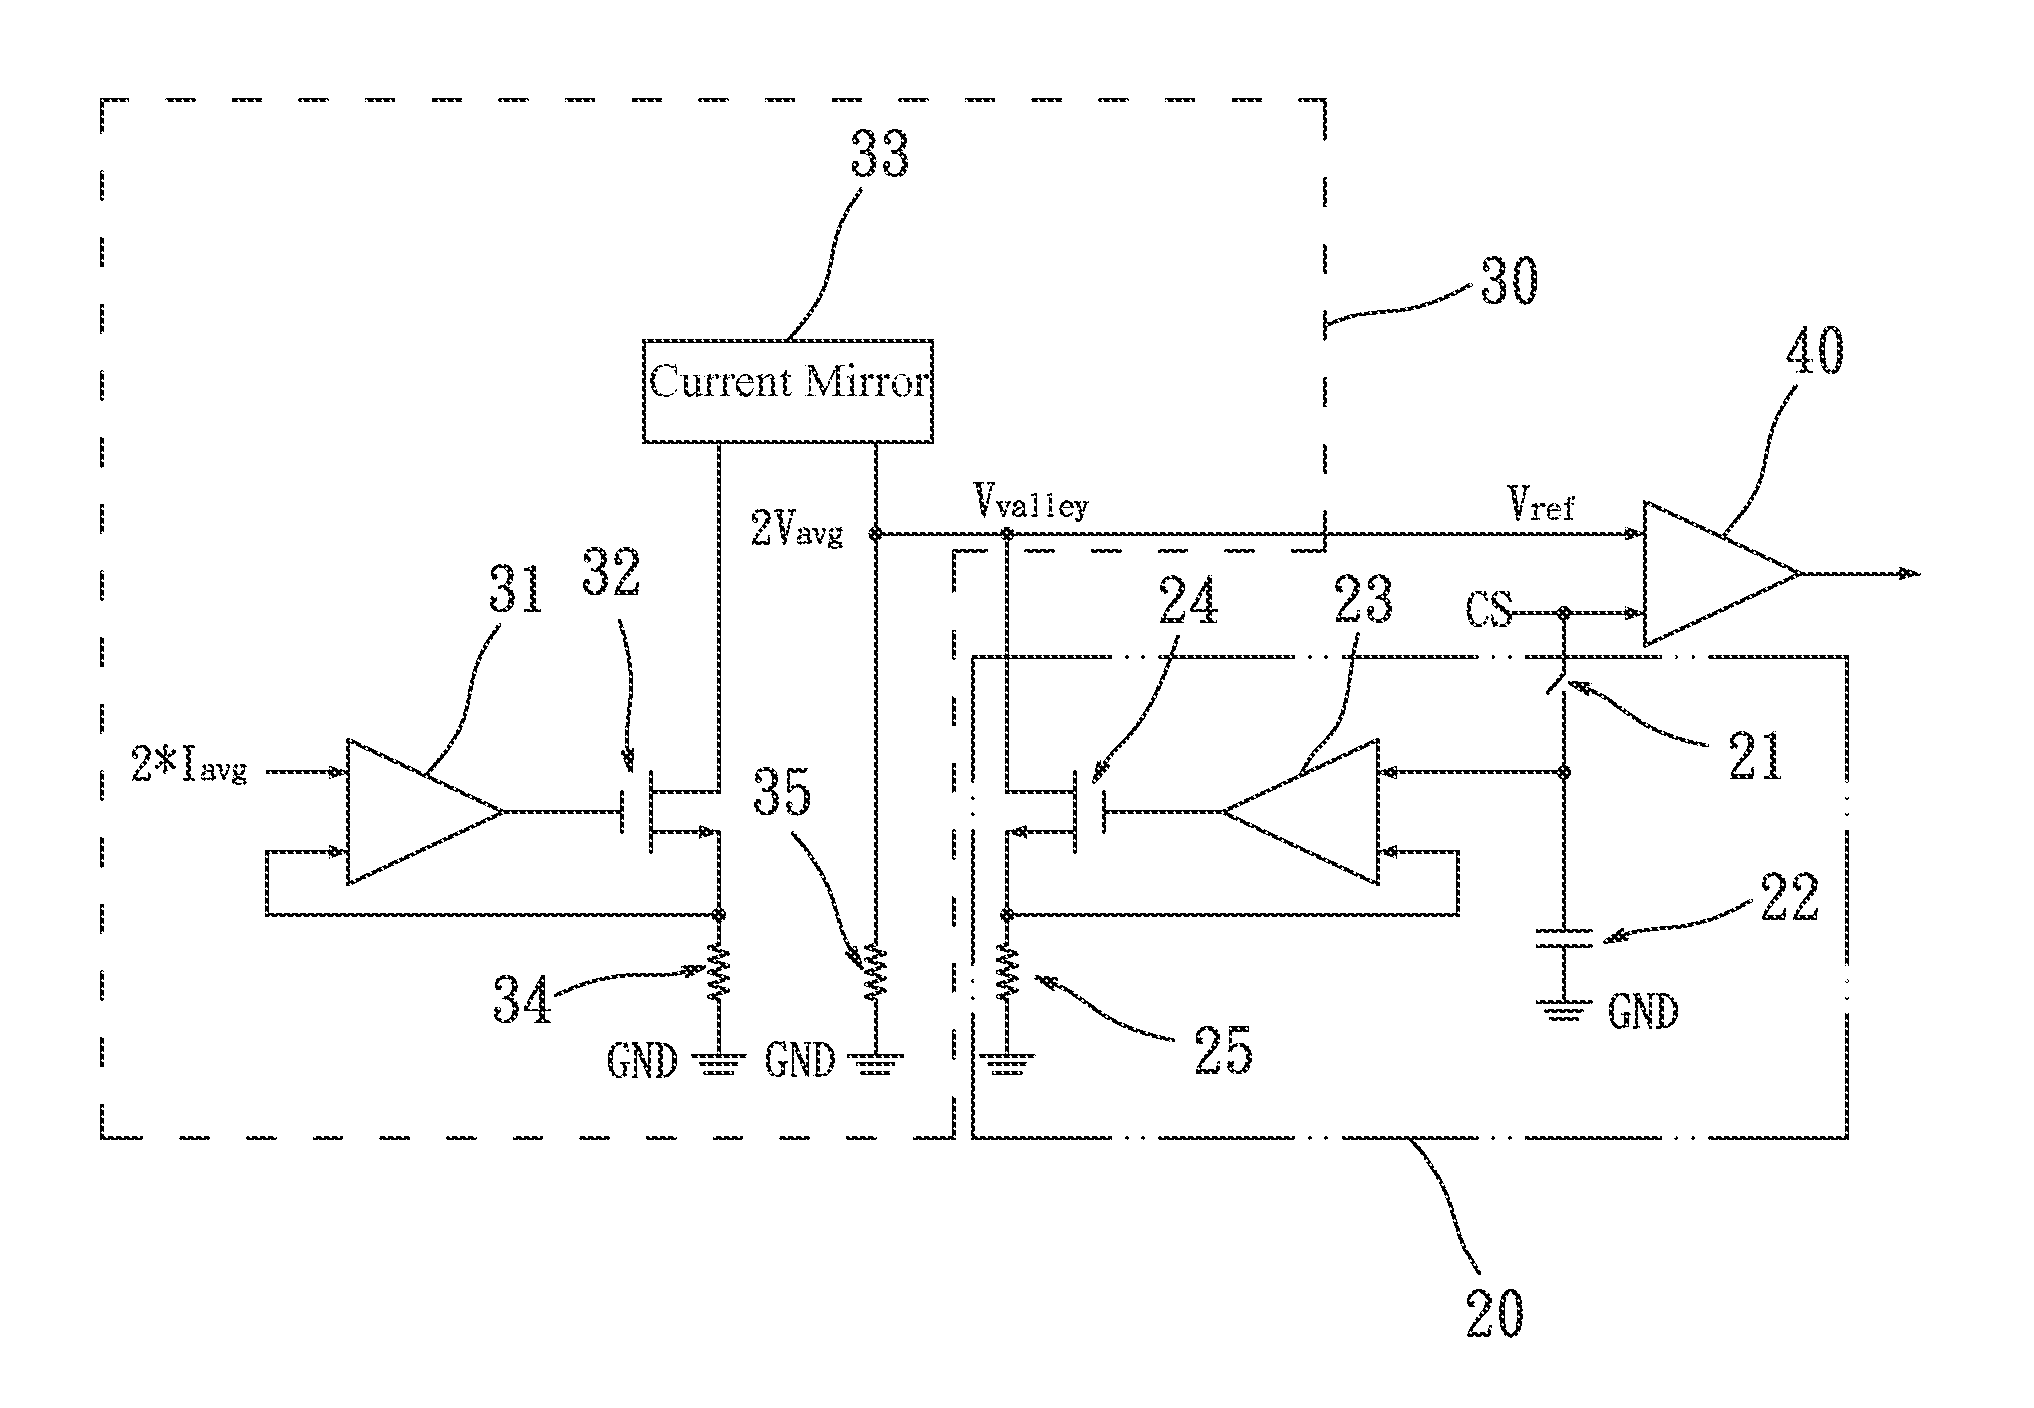 Average inductor current control using variable reference voltage